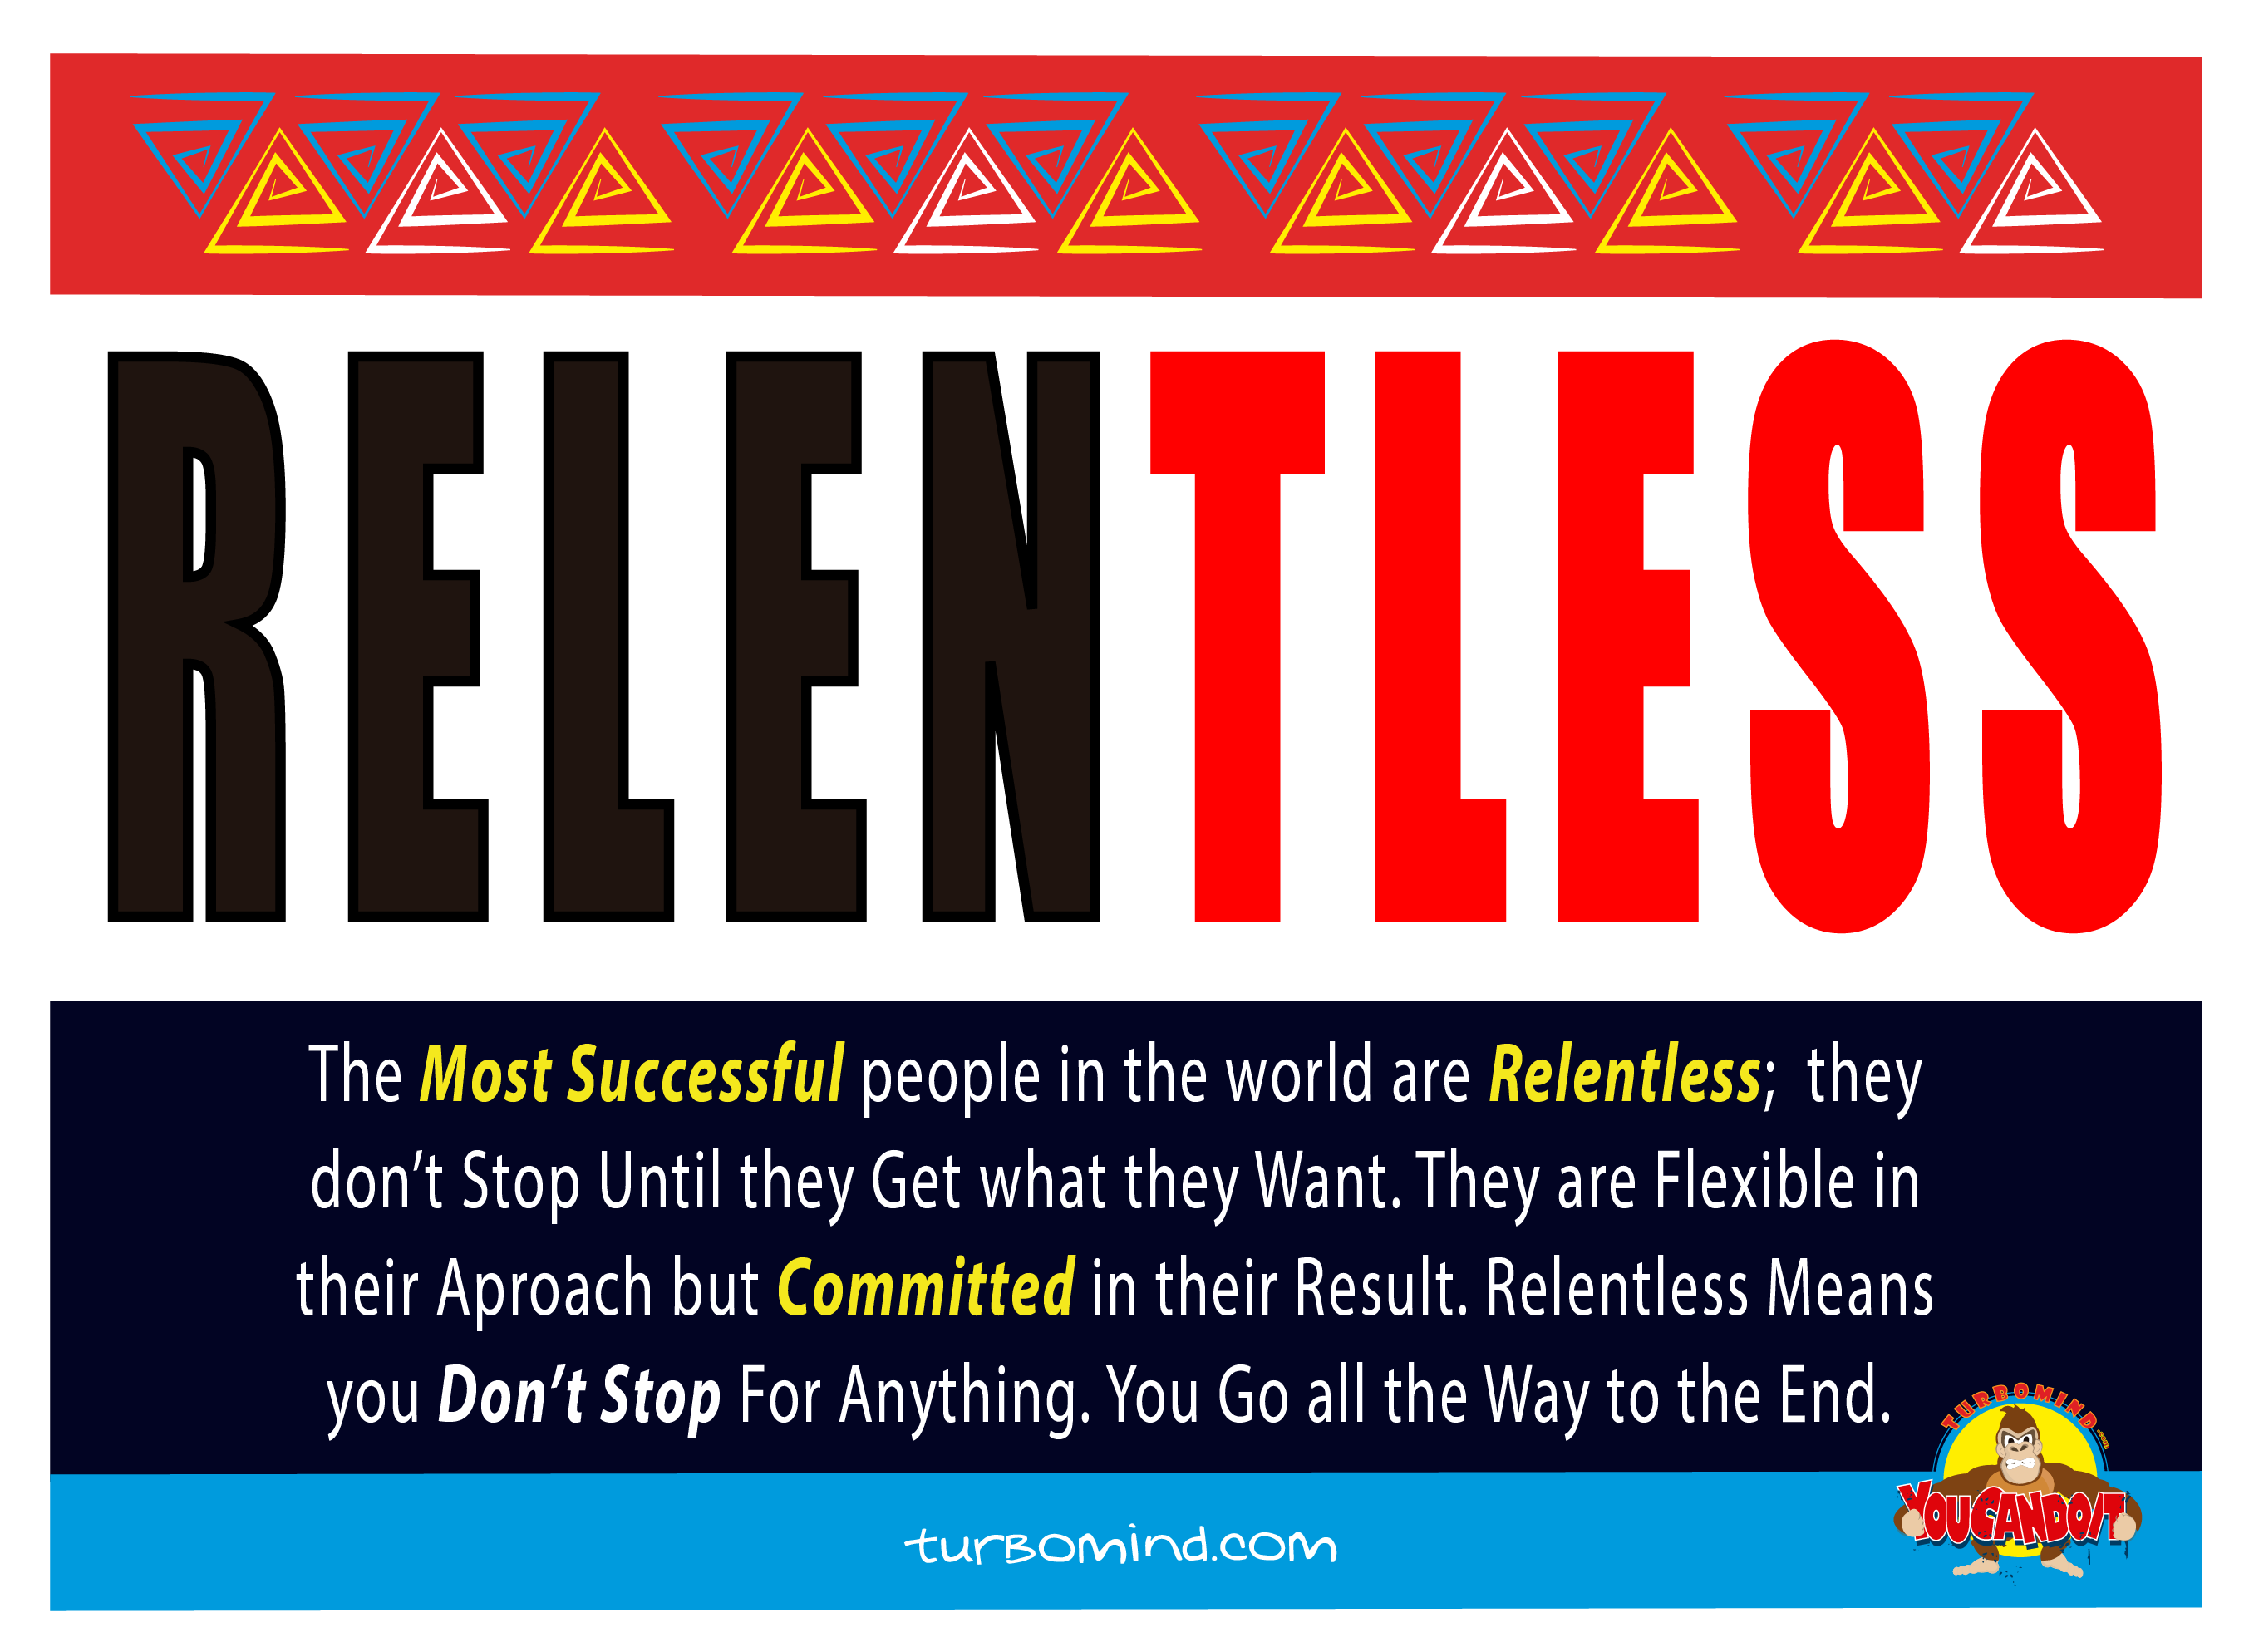 Relentless. TurboMind Daily inspiration